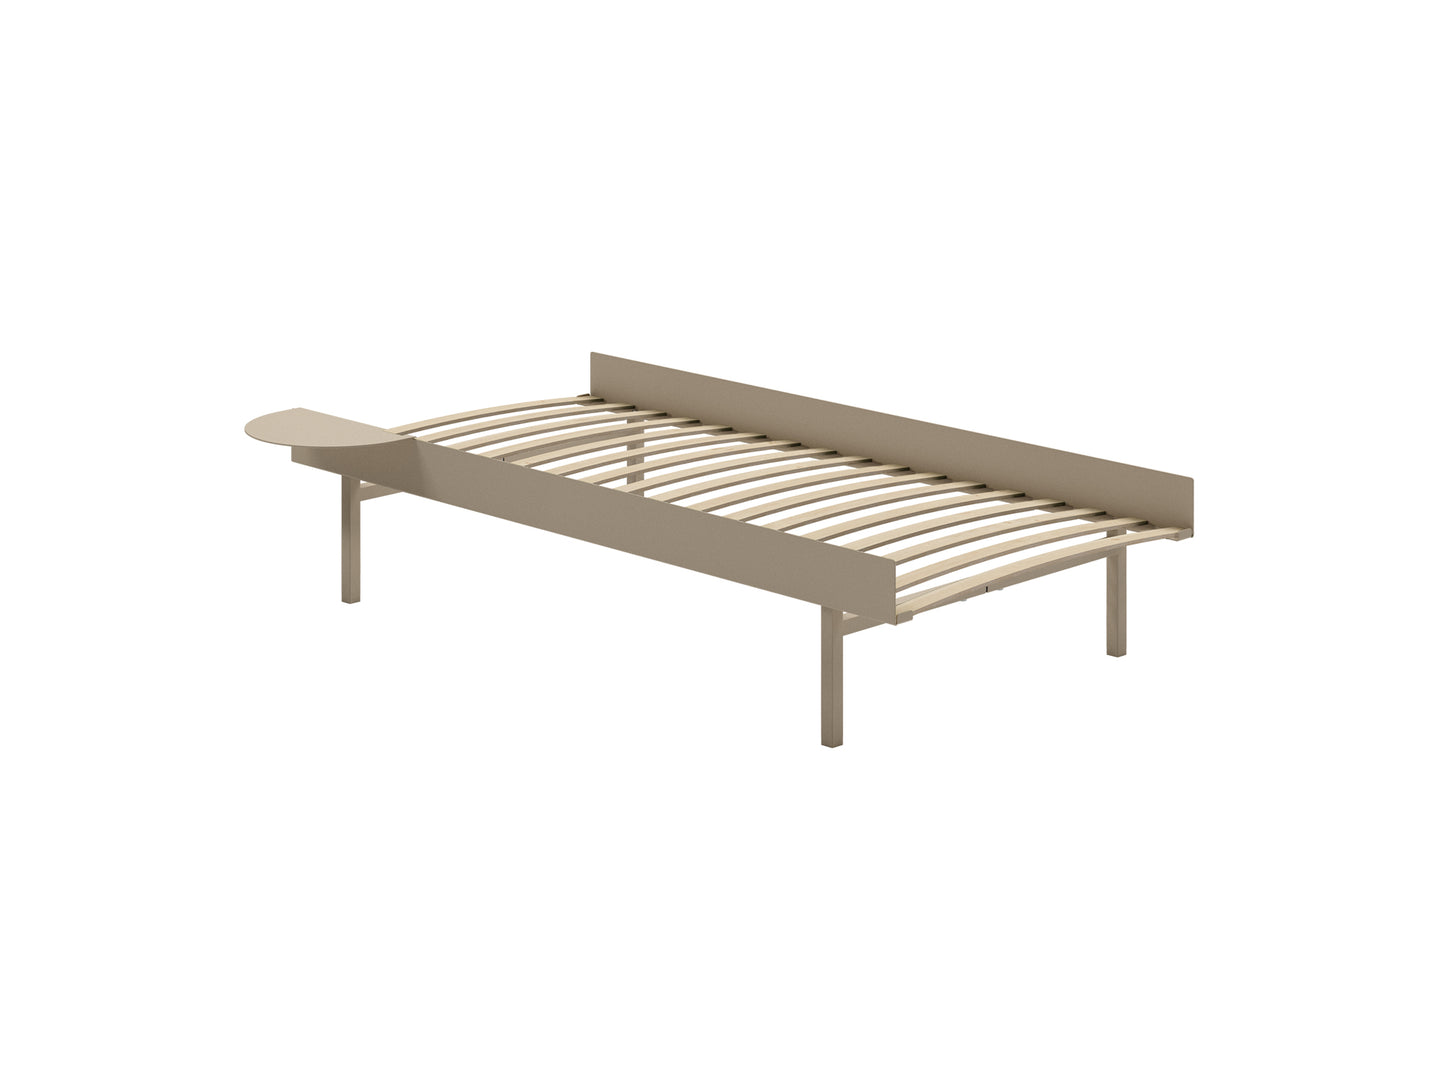 Bed 90 - 180 cm (High) by Moebe- Bed Frame / with 90cm wide Slats /  1 Side Table / Sand